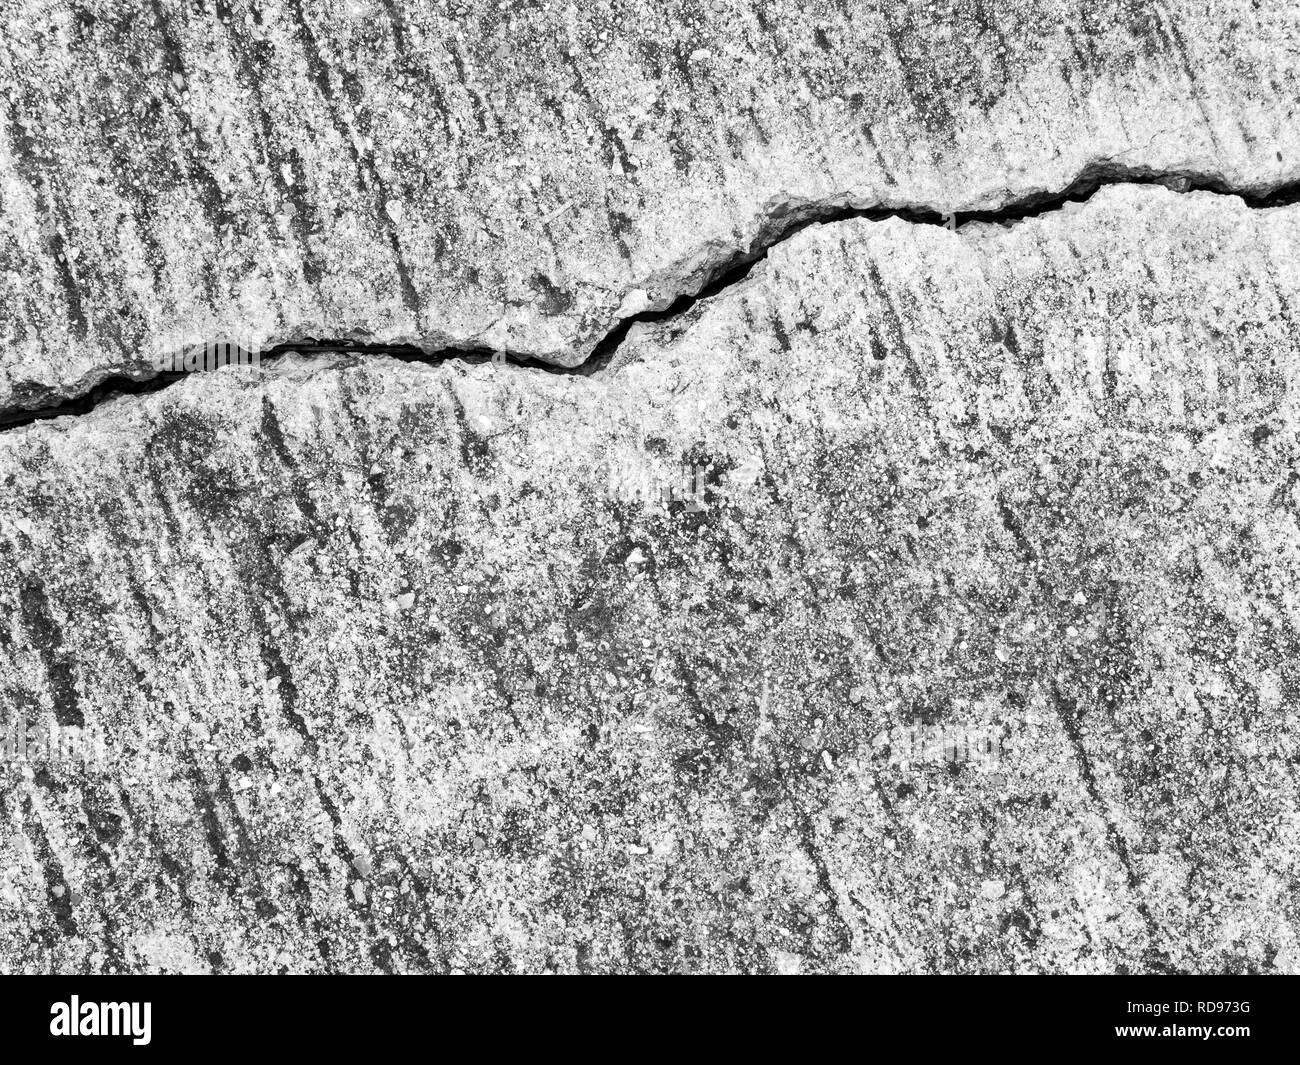 Cracked and separated on concrete floor Stock Photo